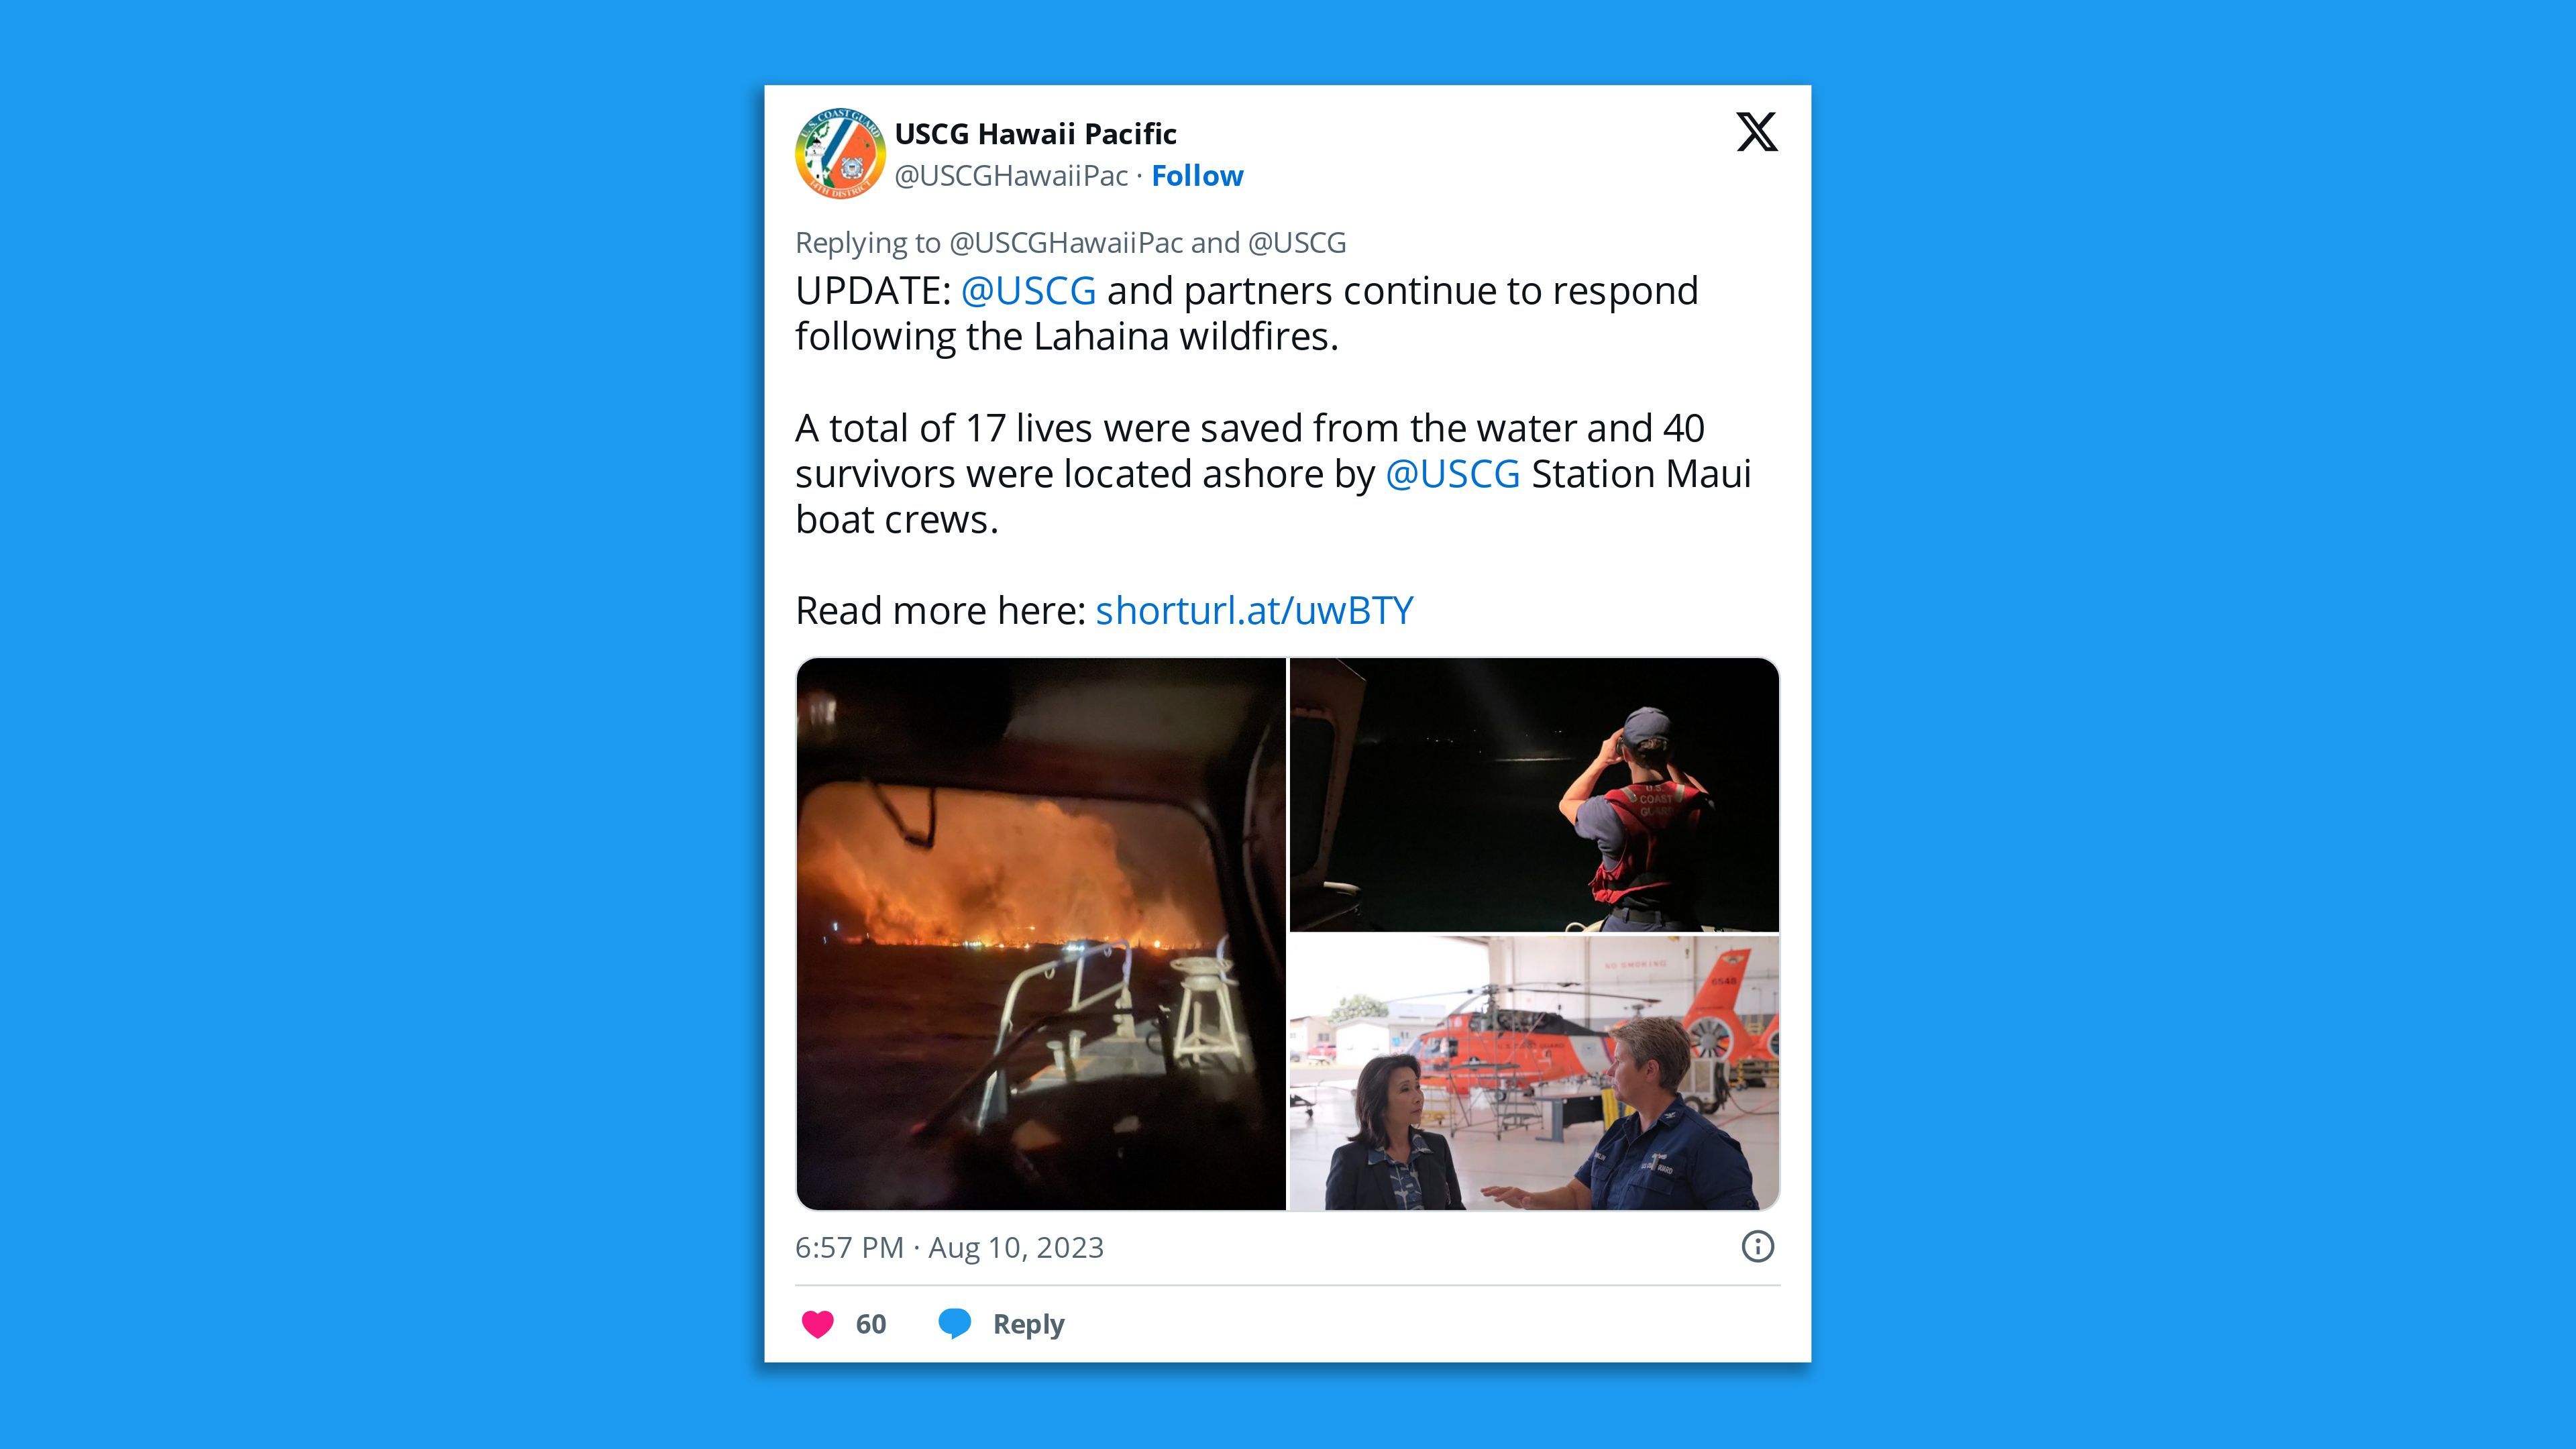 A screenshot of a tweet by the  U.S. Coast Guard in Hawaii, saying: "@USCG  and partners continue to respond following the Lahaina wildfires.   A total of 17 lives were saved from the water and 40 survivors were located ashore by  @USCG  Station Maui boat crews."